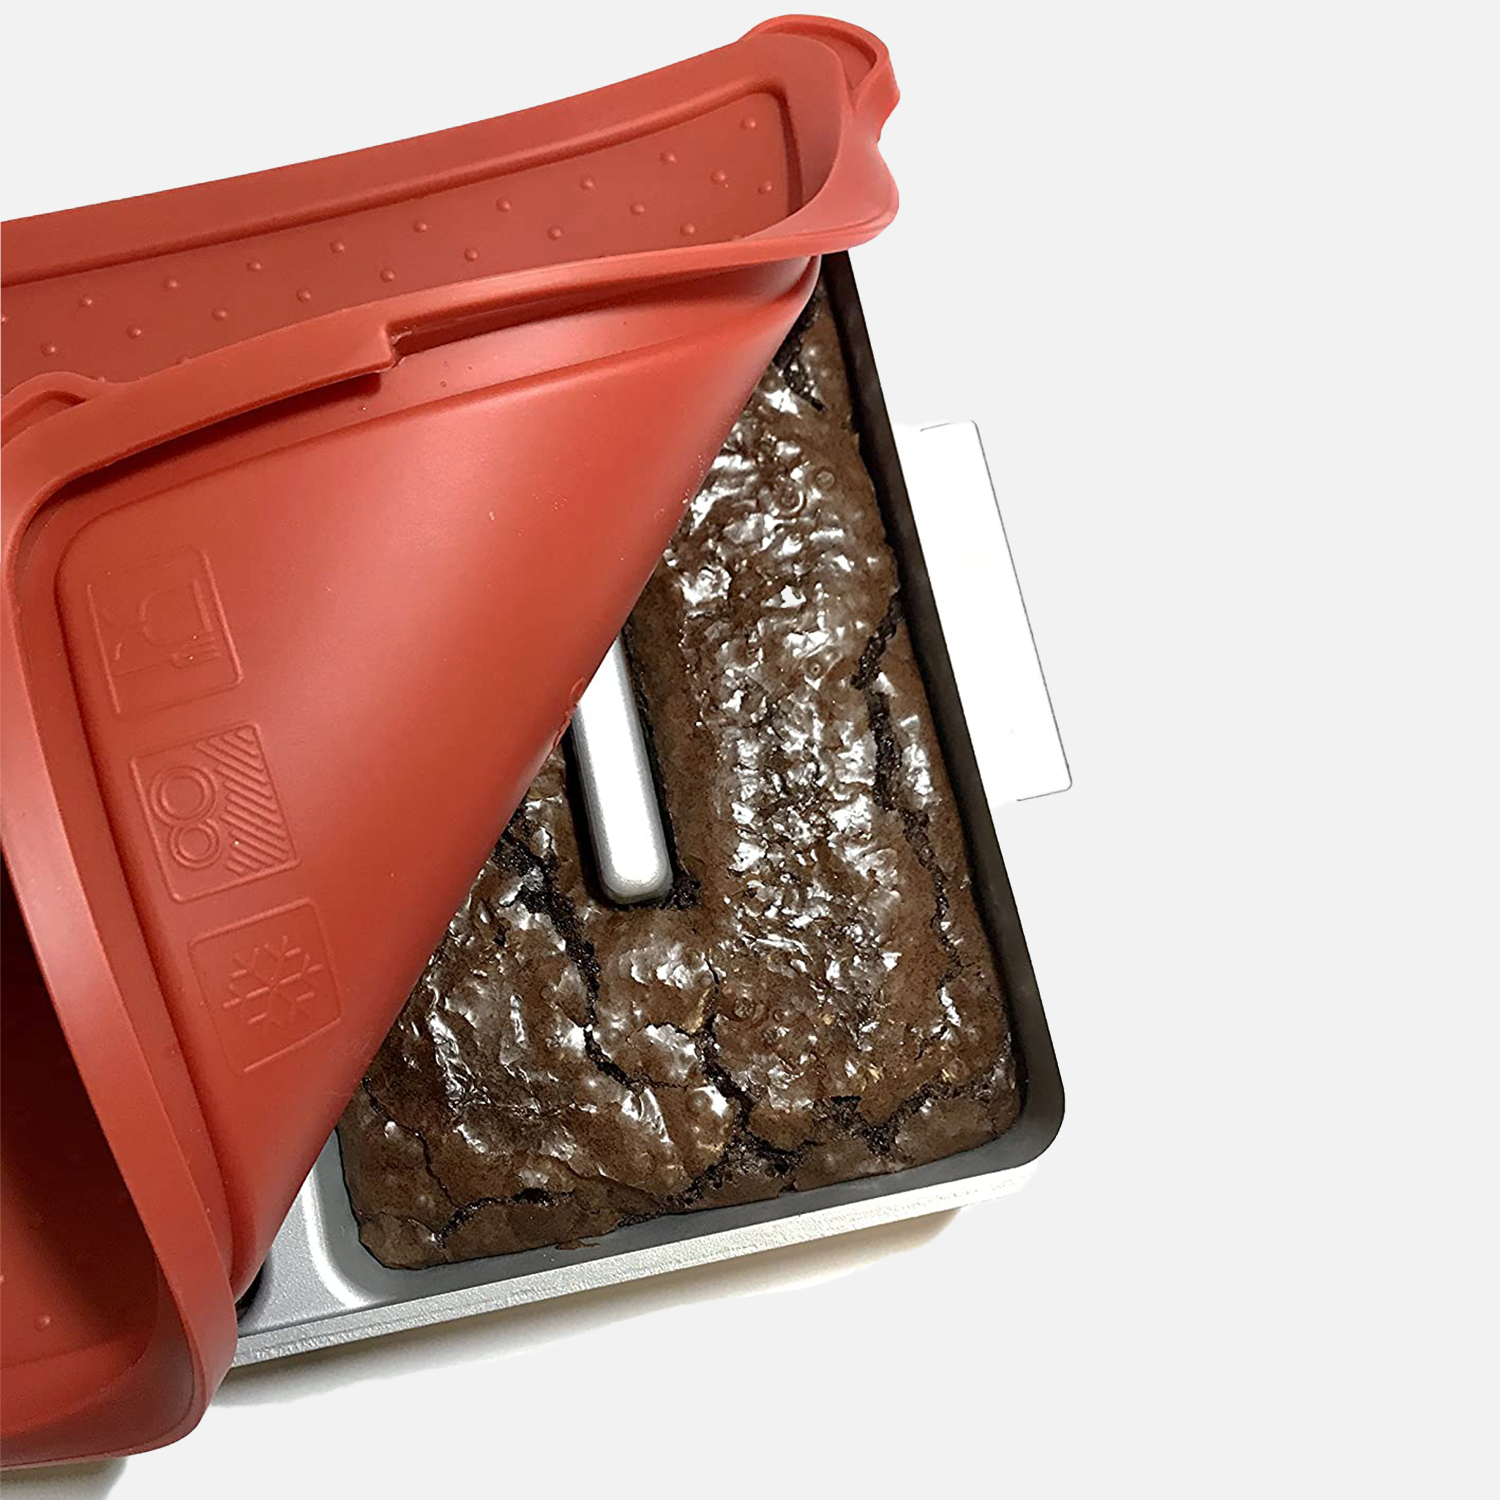 And while we're talking about pans, a Baker's Edge brownie pan